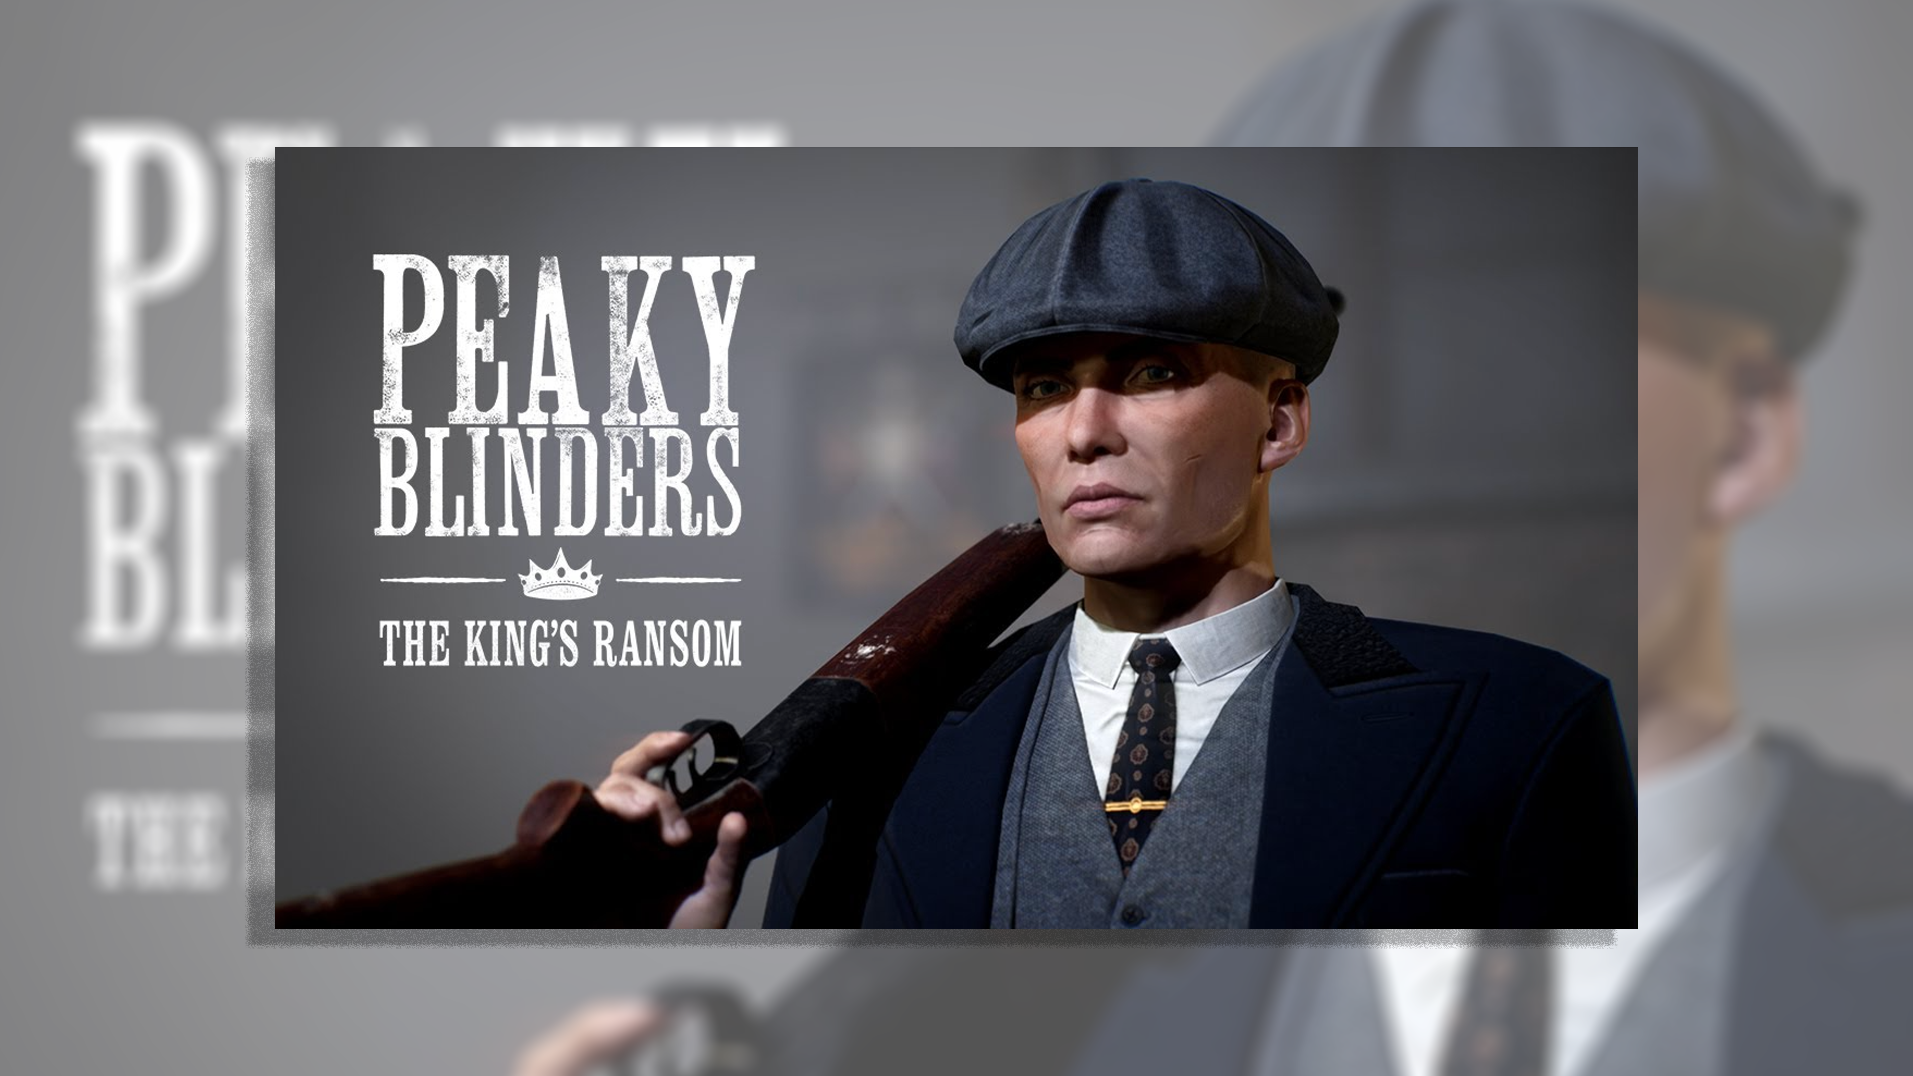 ENDEMOL SHINE GROUP REVALS SIX NEW LICENSEES FOR PEAKY BLINDERS